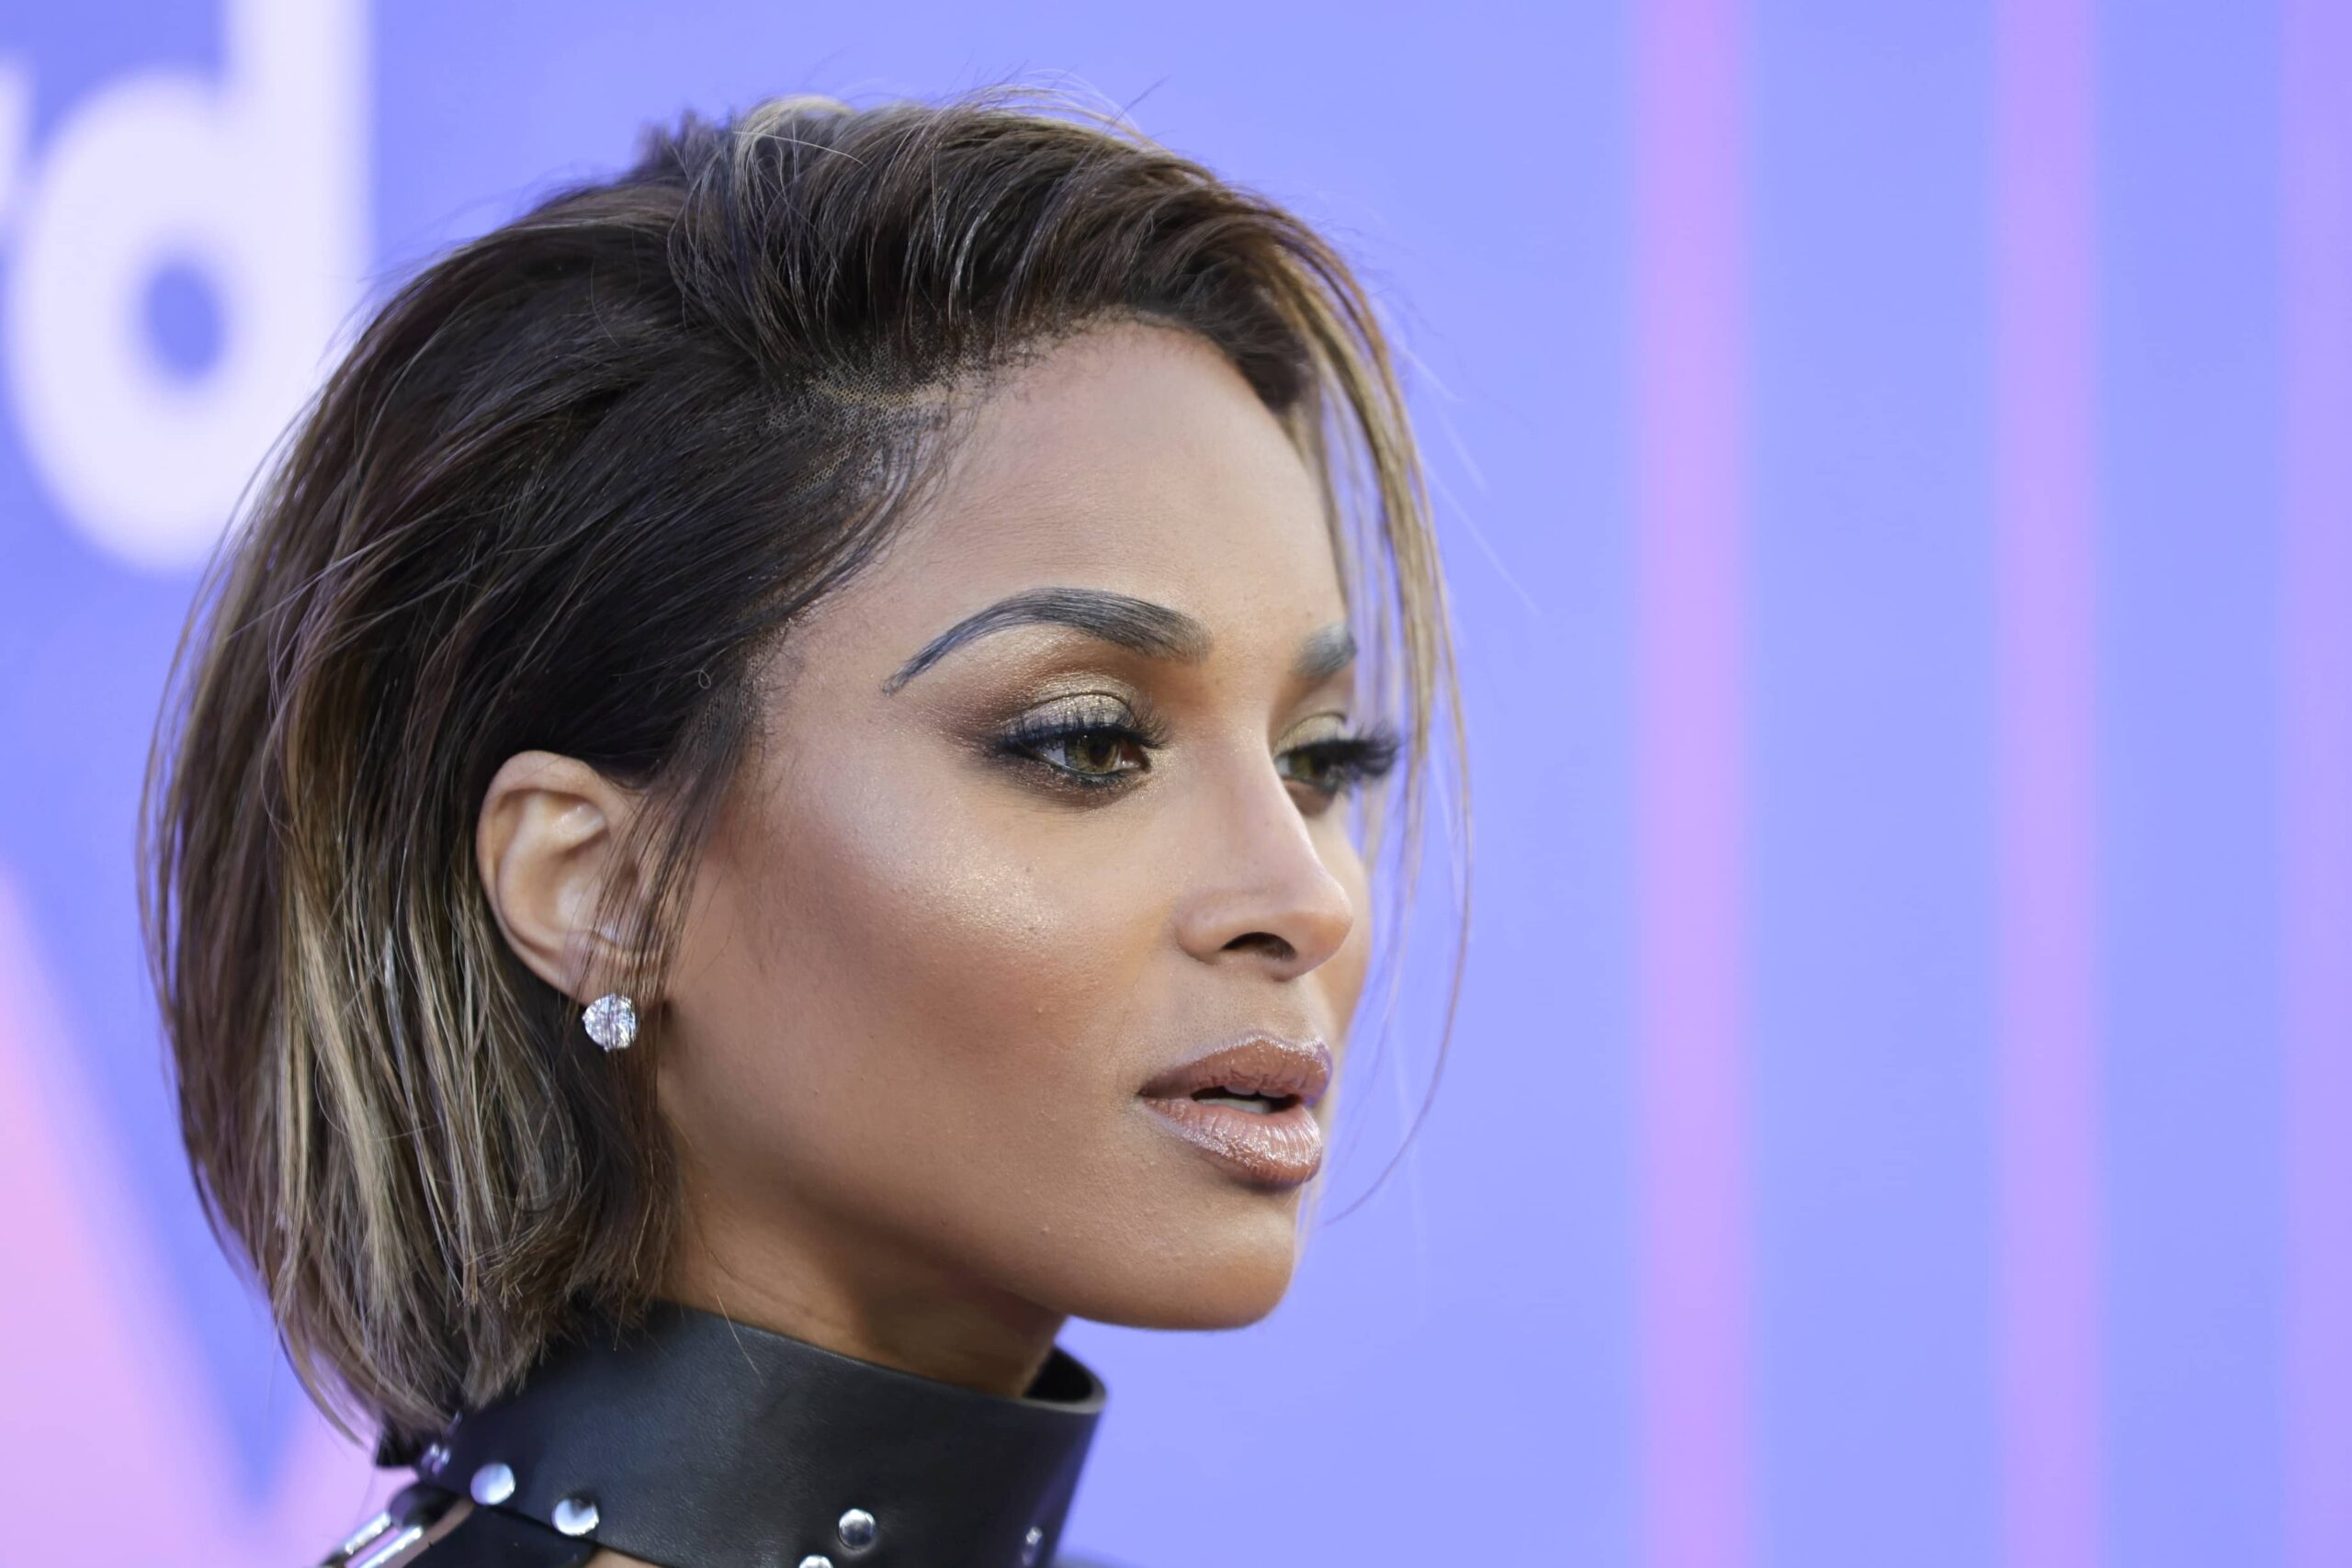 Ciara makes her booty "jump" in new music video